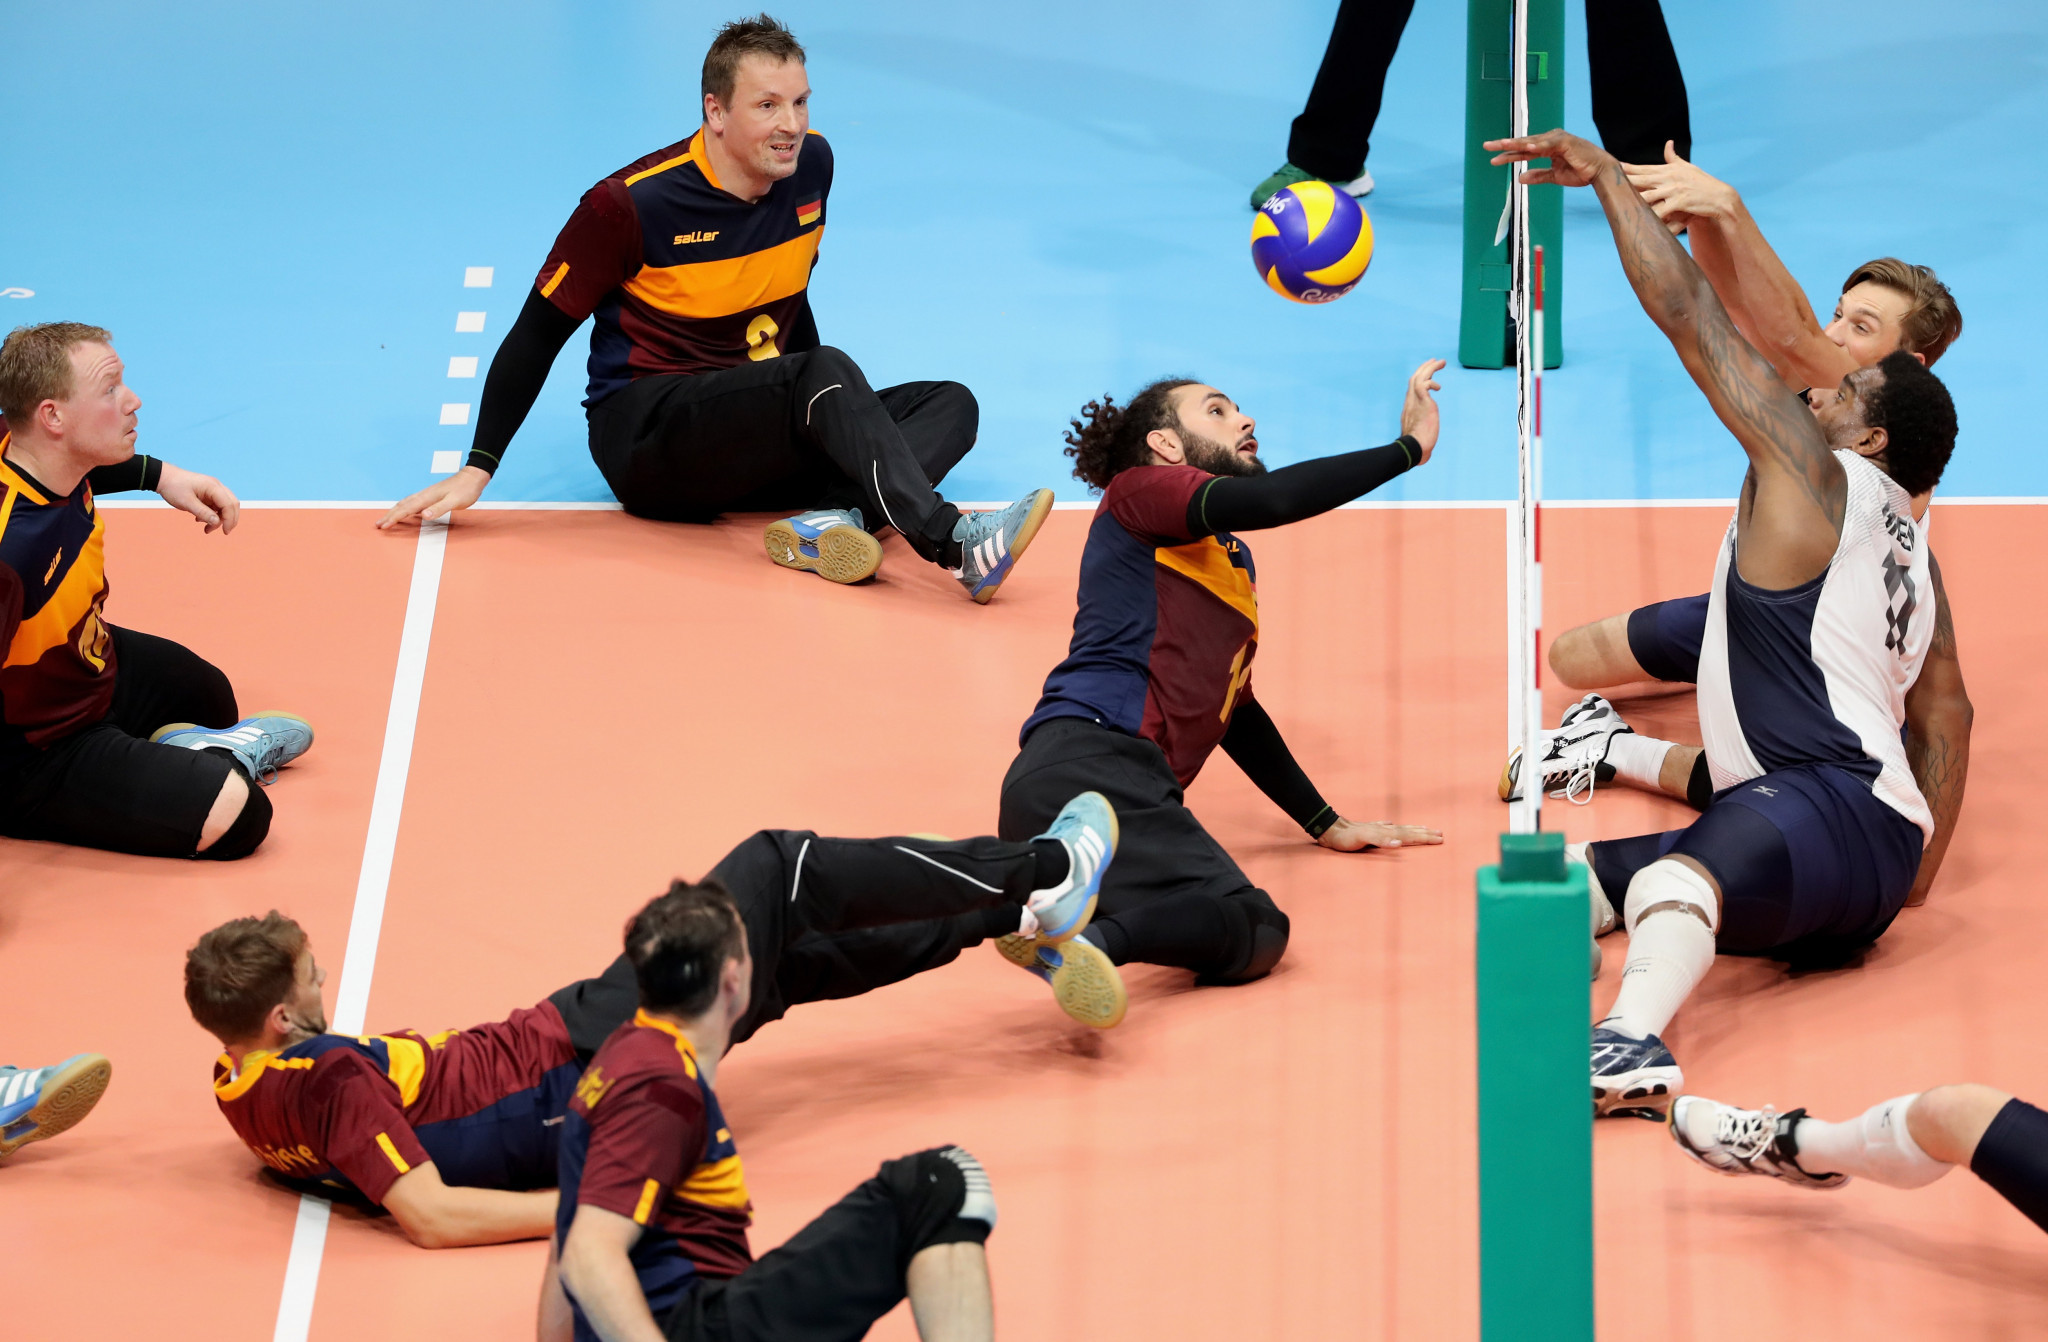 Duisburg to host re-arranged World ParaVolley Men’s Paralympic Qualifier